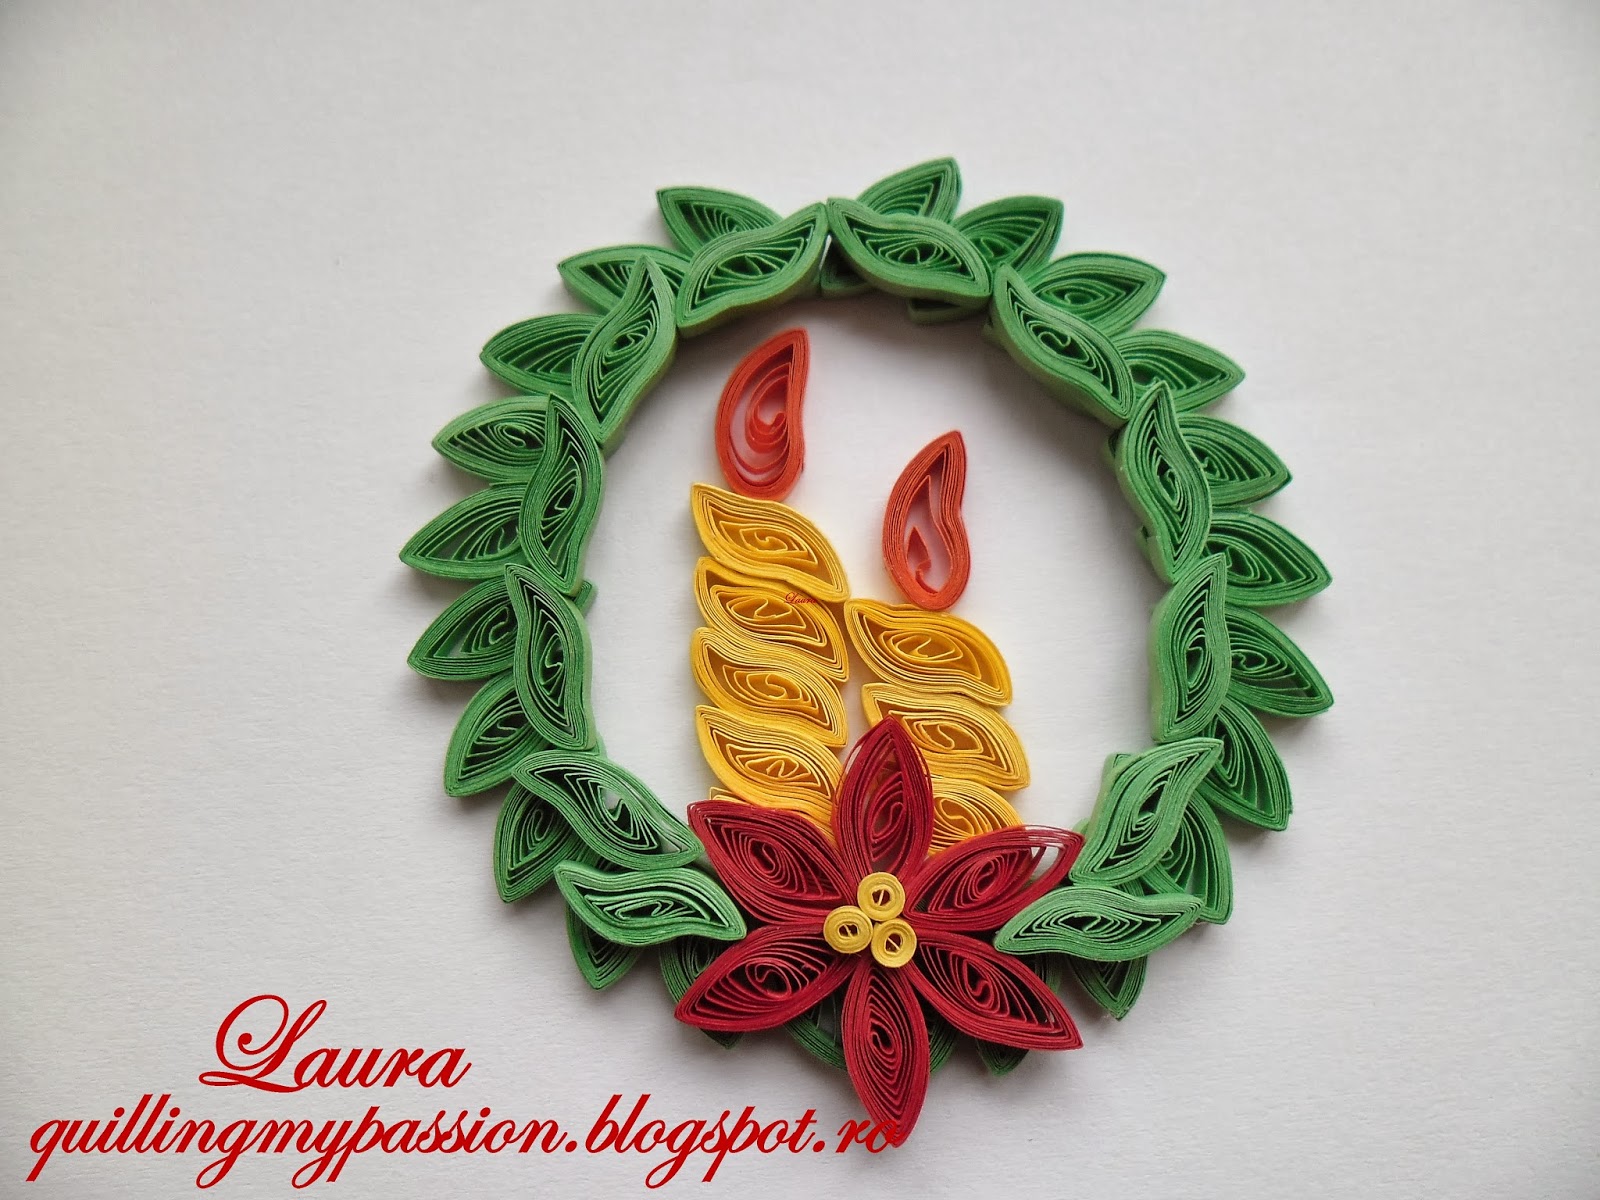 quilling my passion: quilled christmas ornaments